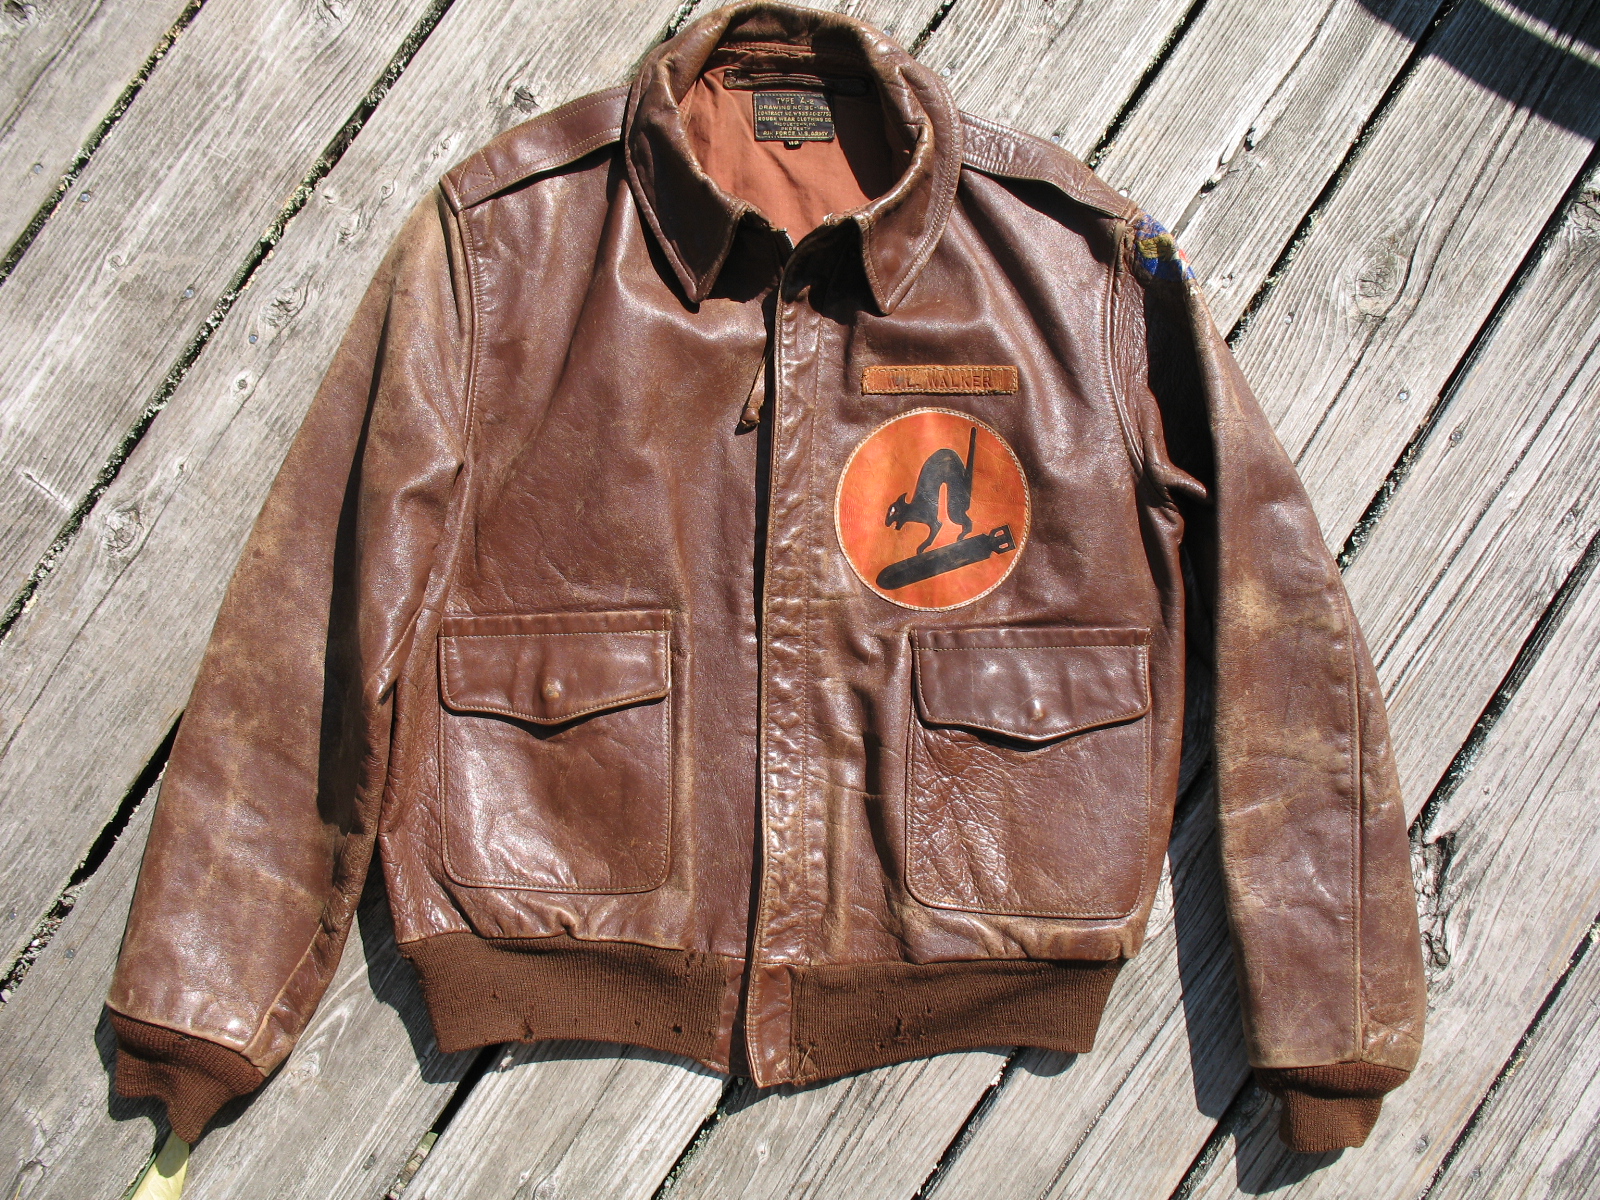 Any opinions on what this one is? | Page 2 | Vintage Leather Jackets Forum